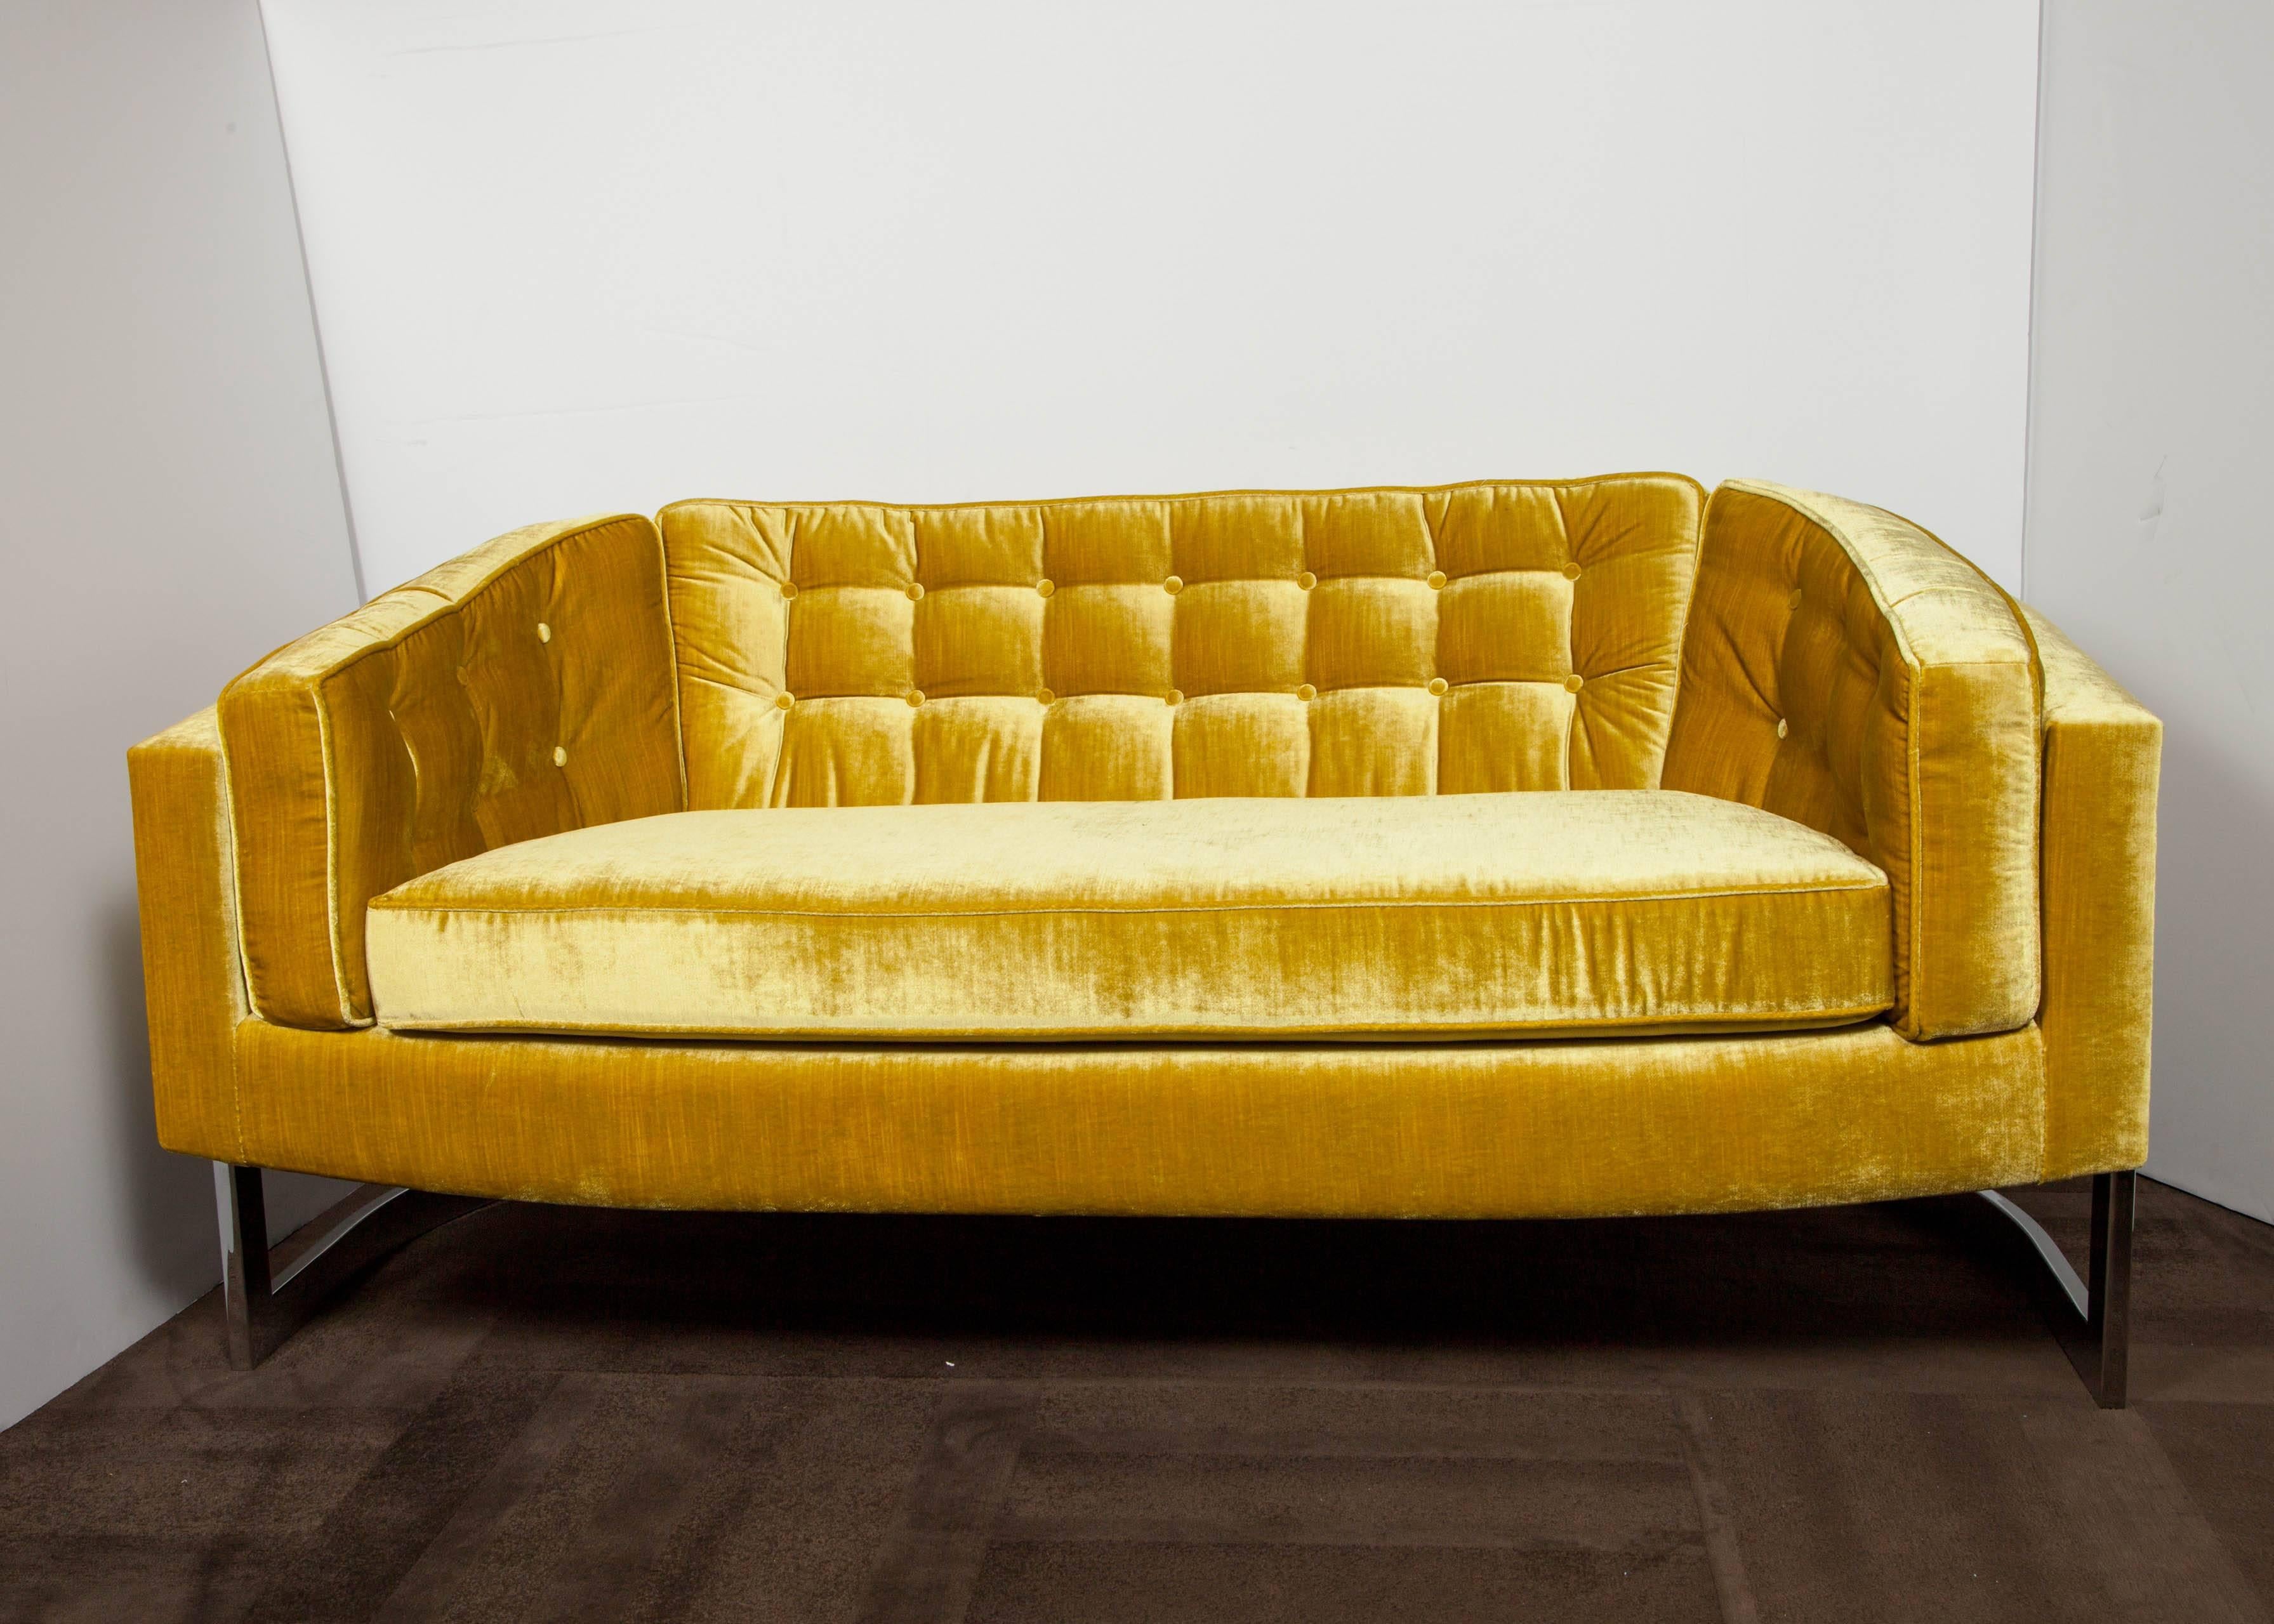 Luxurious loveseat with a streamline cantilevered frame in polished chrome. Ultra chic design with barrel form exemplifying the best of American Mid-Century design. Newly reupholstered in a rich citrine velvet with tailored biscuit tufted details